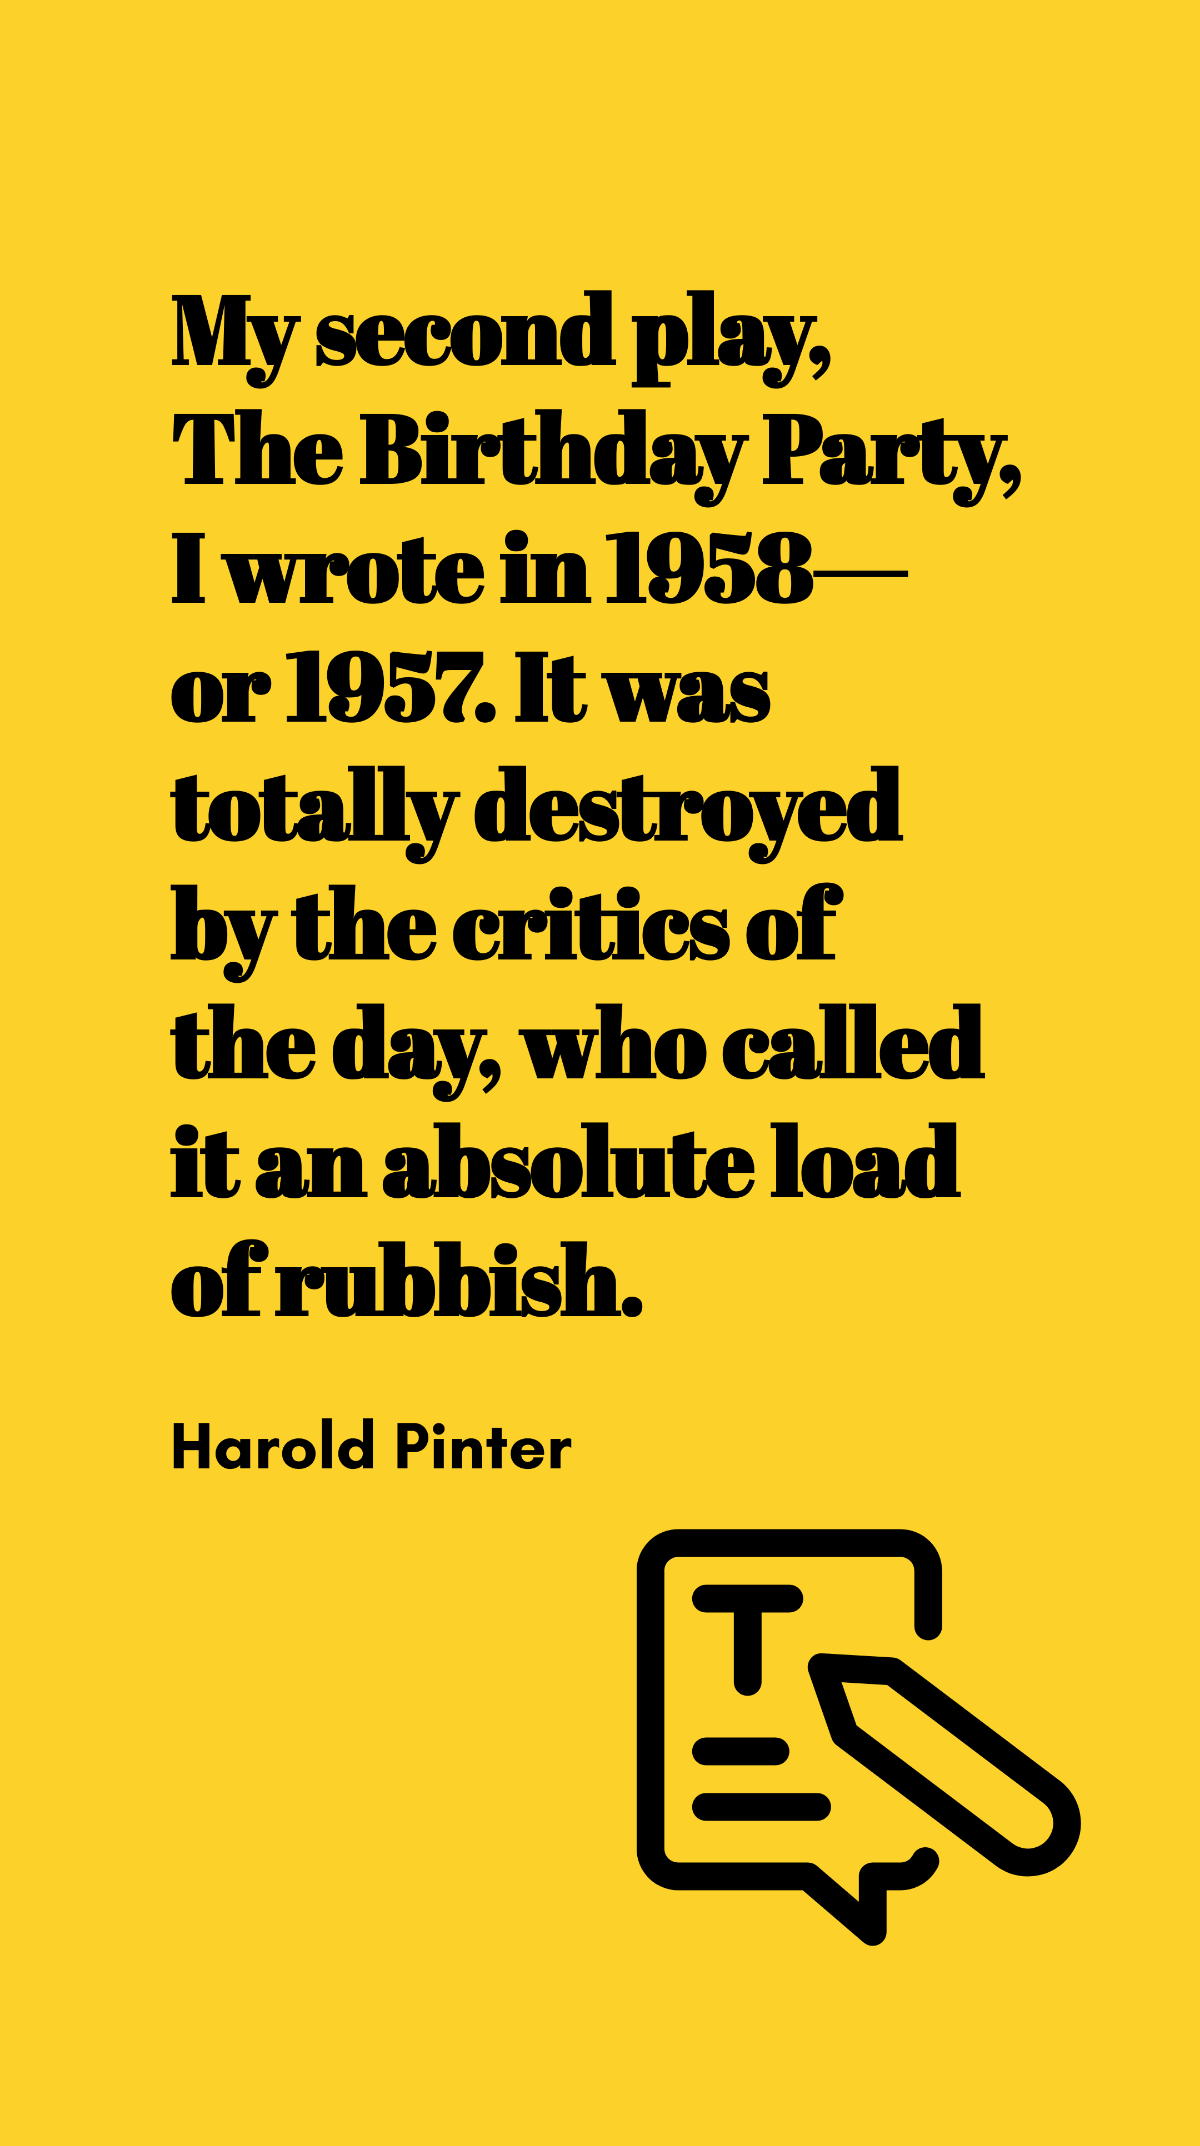 Harold Pinter - My second play, The Birthday Party, I wrote in 1958 - or 1957. It was totally destroyed by the critics of the day, who called it an absolute load of rubbish.